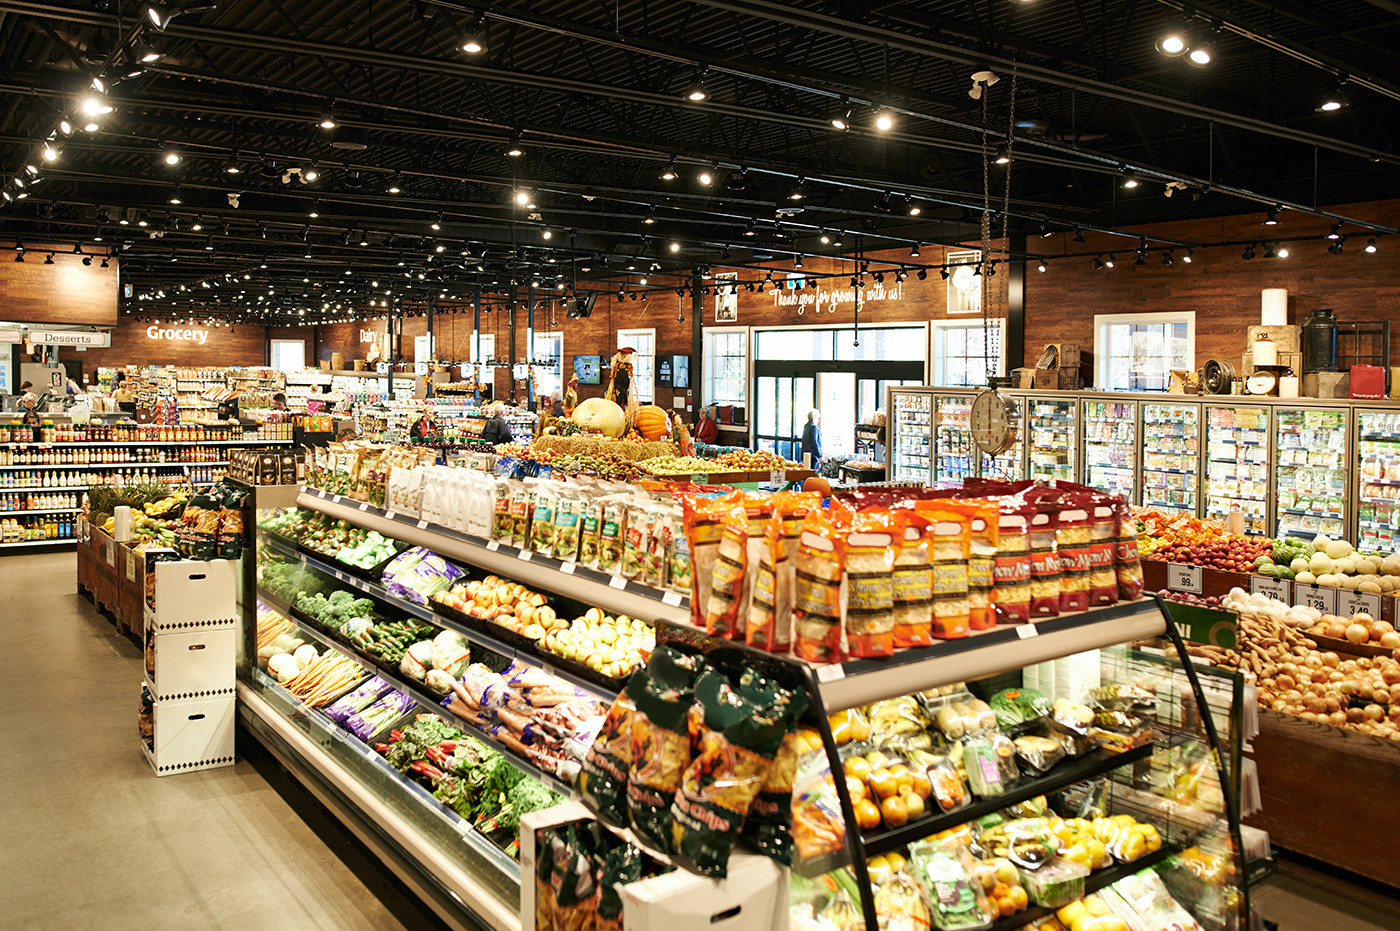 An image overlooking most of a grocery store, with part of the product center in the front.